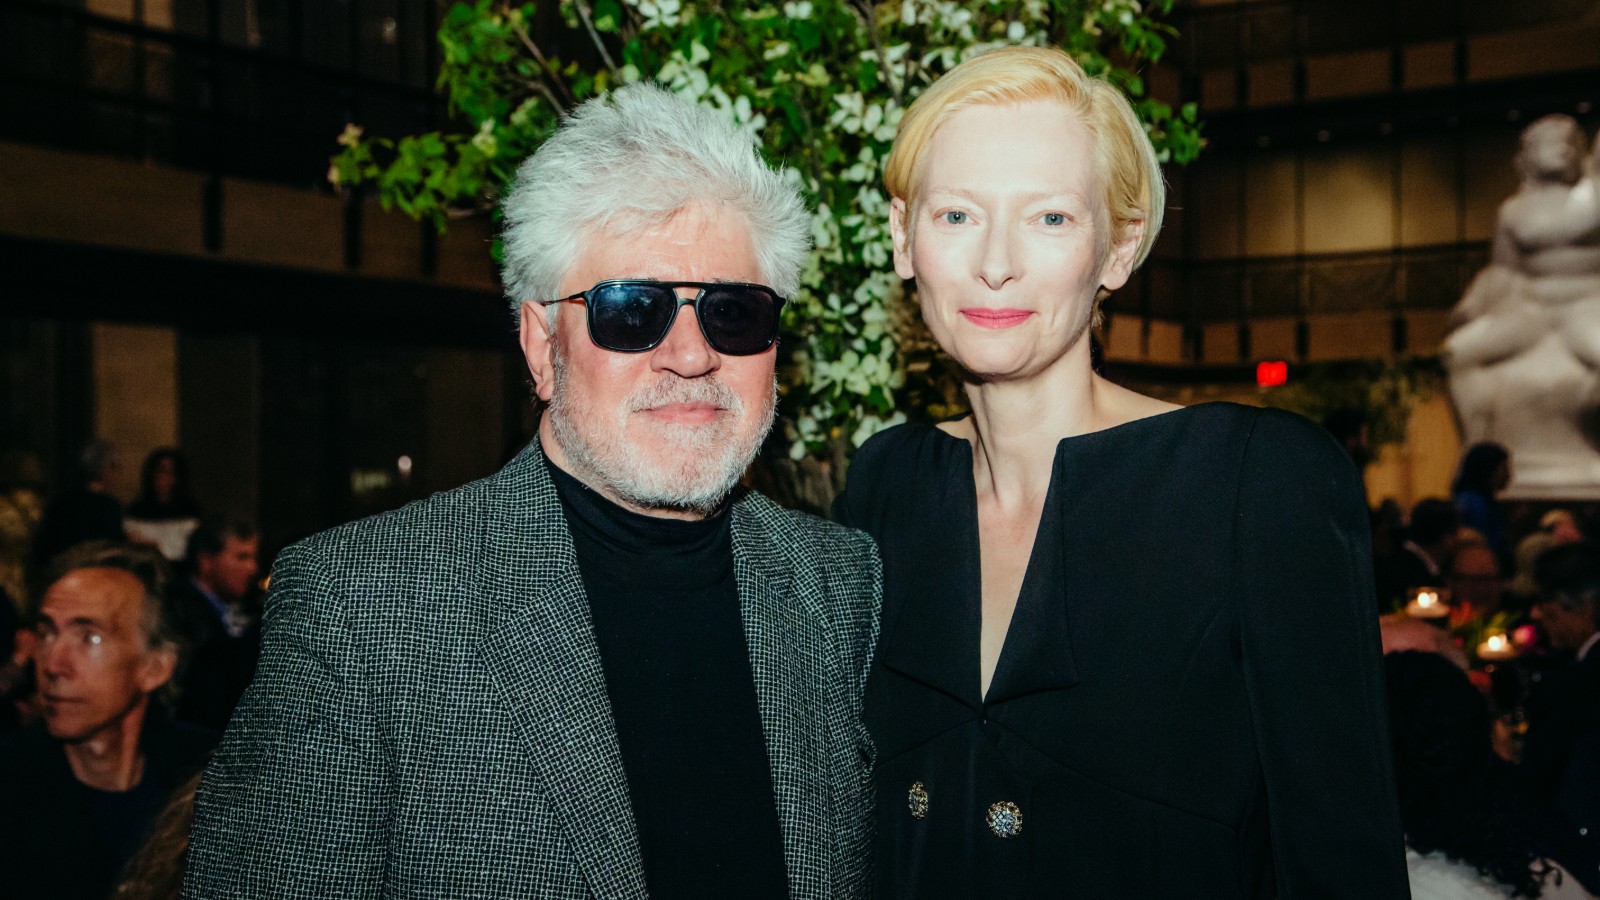 Pedro Almodóvar Announces New Short Film Starring Tilda Swinton and A Manual for Cleaning Women Adaptation